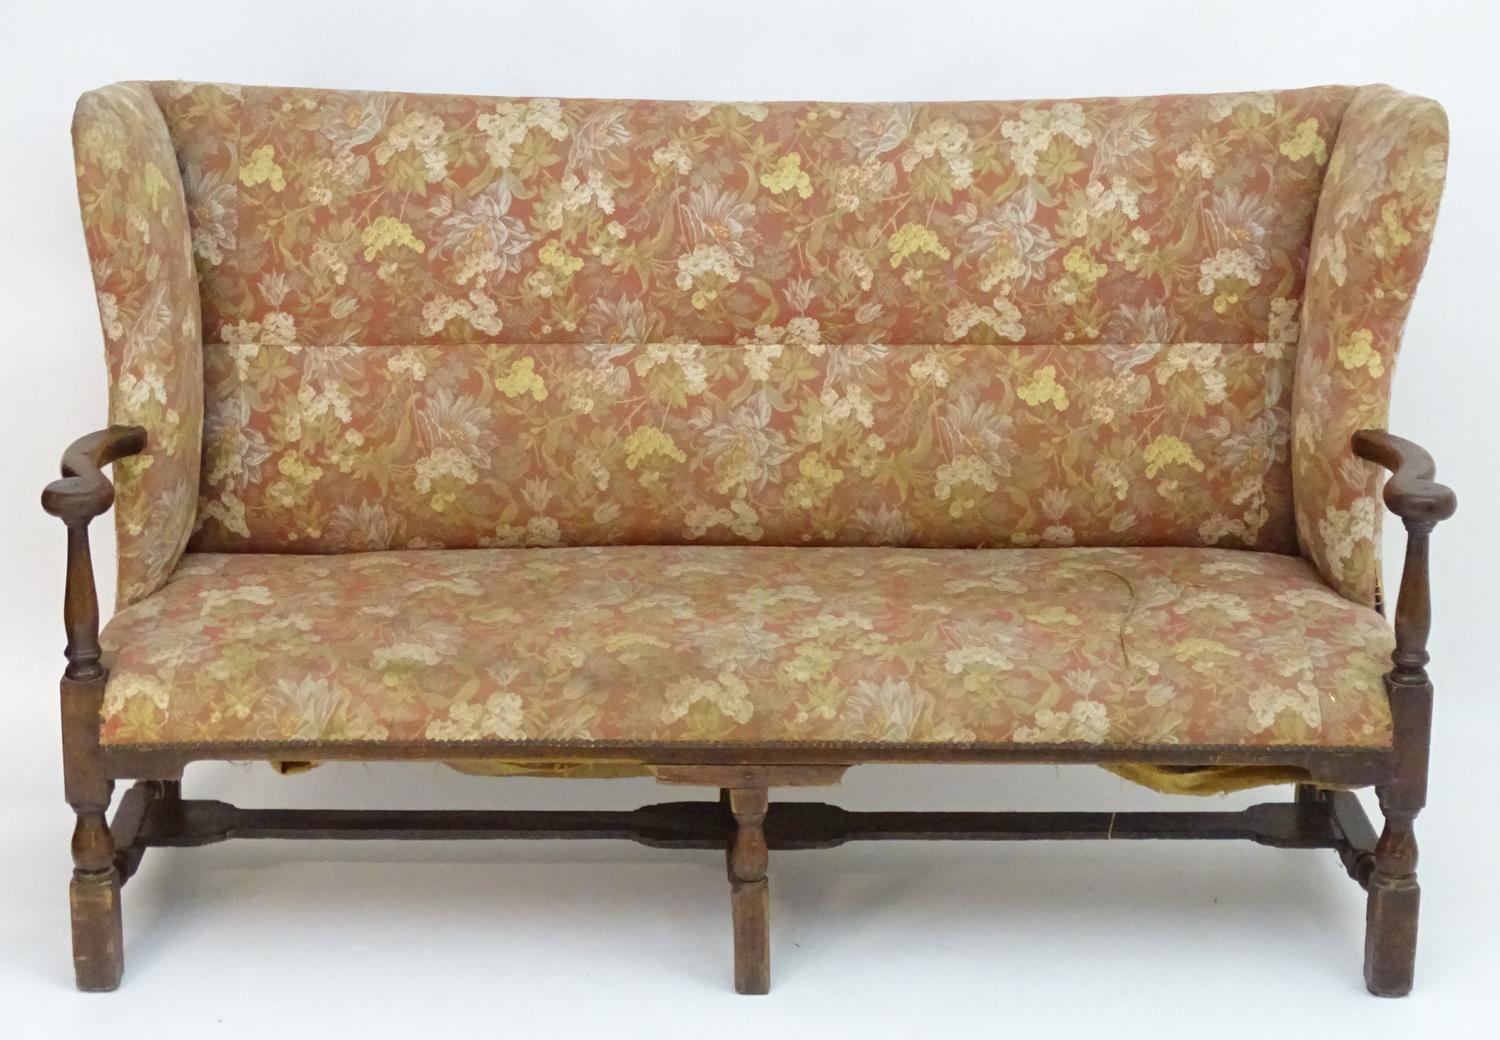 A mid 18thC wingback sofa with scrolled arms and an upholstered backrest and seat above a - Image 3 of 12